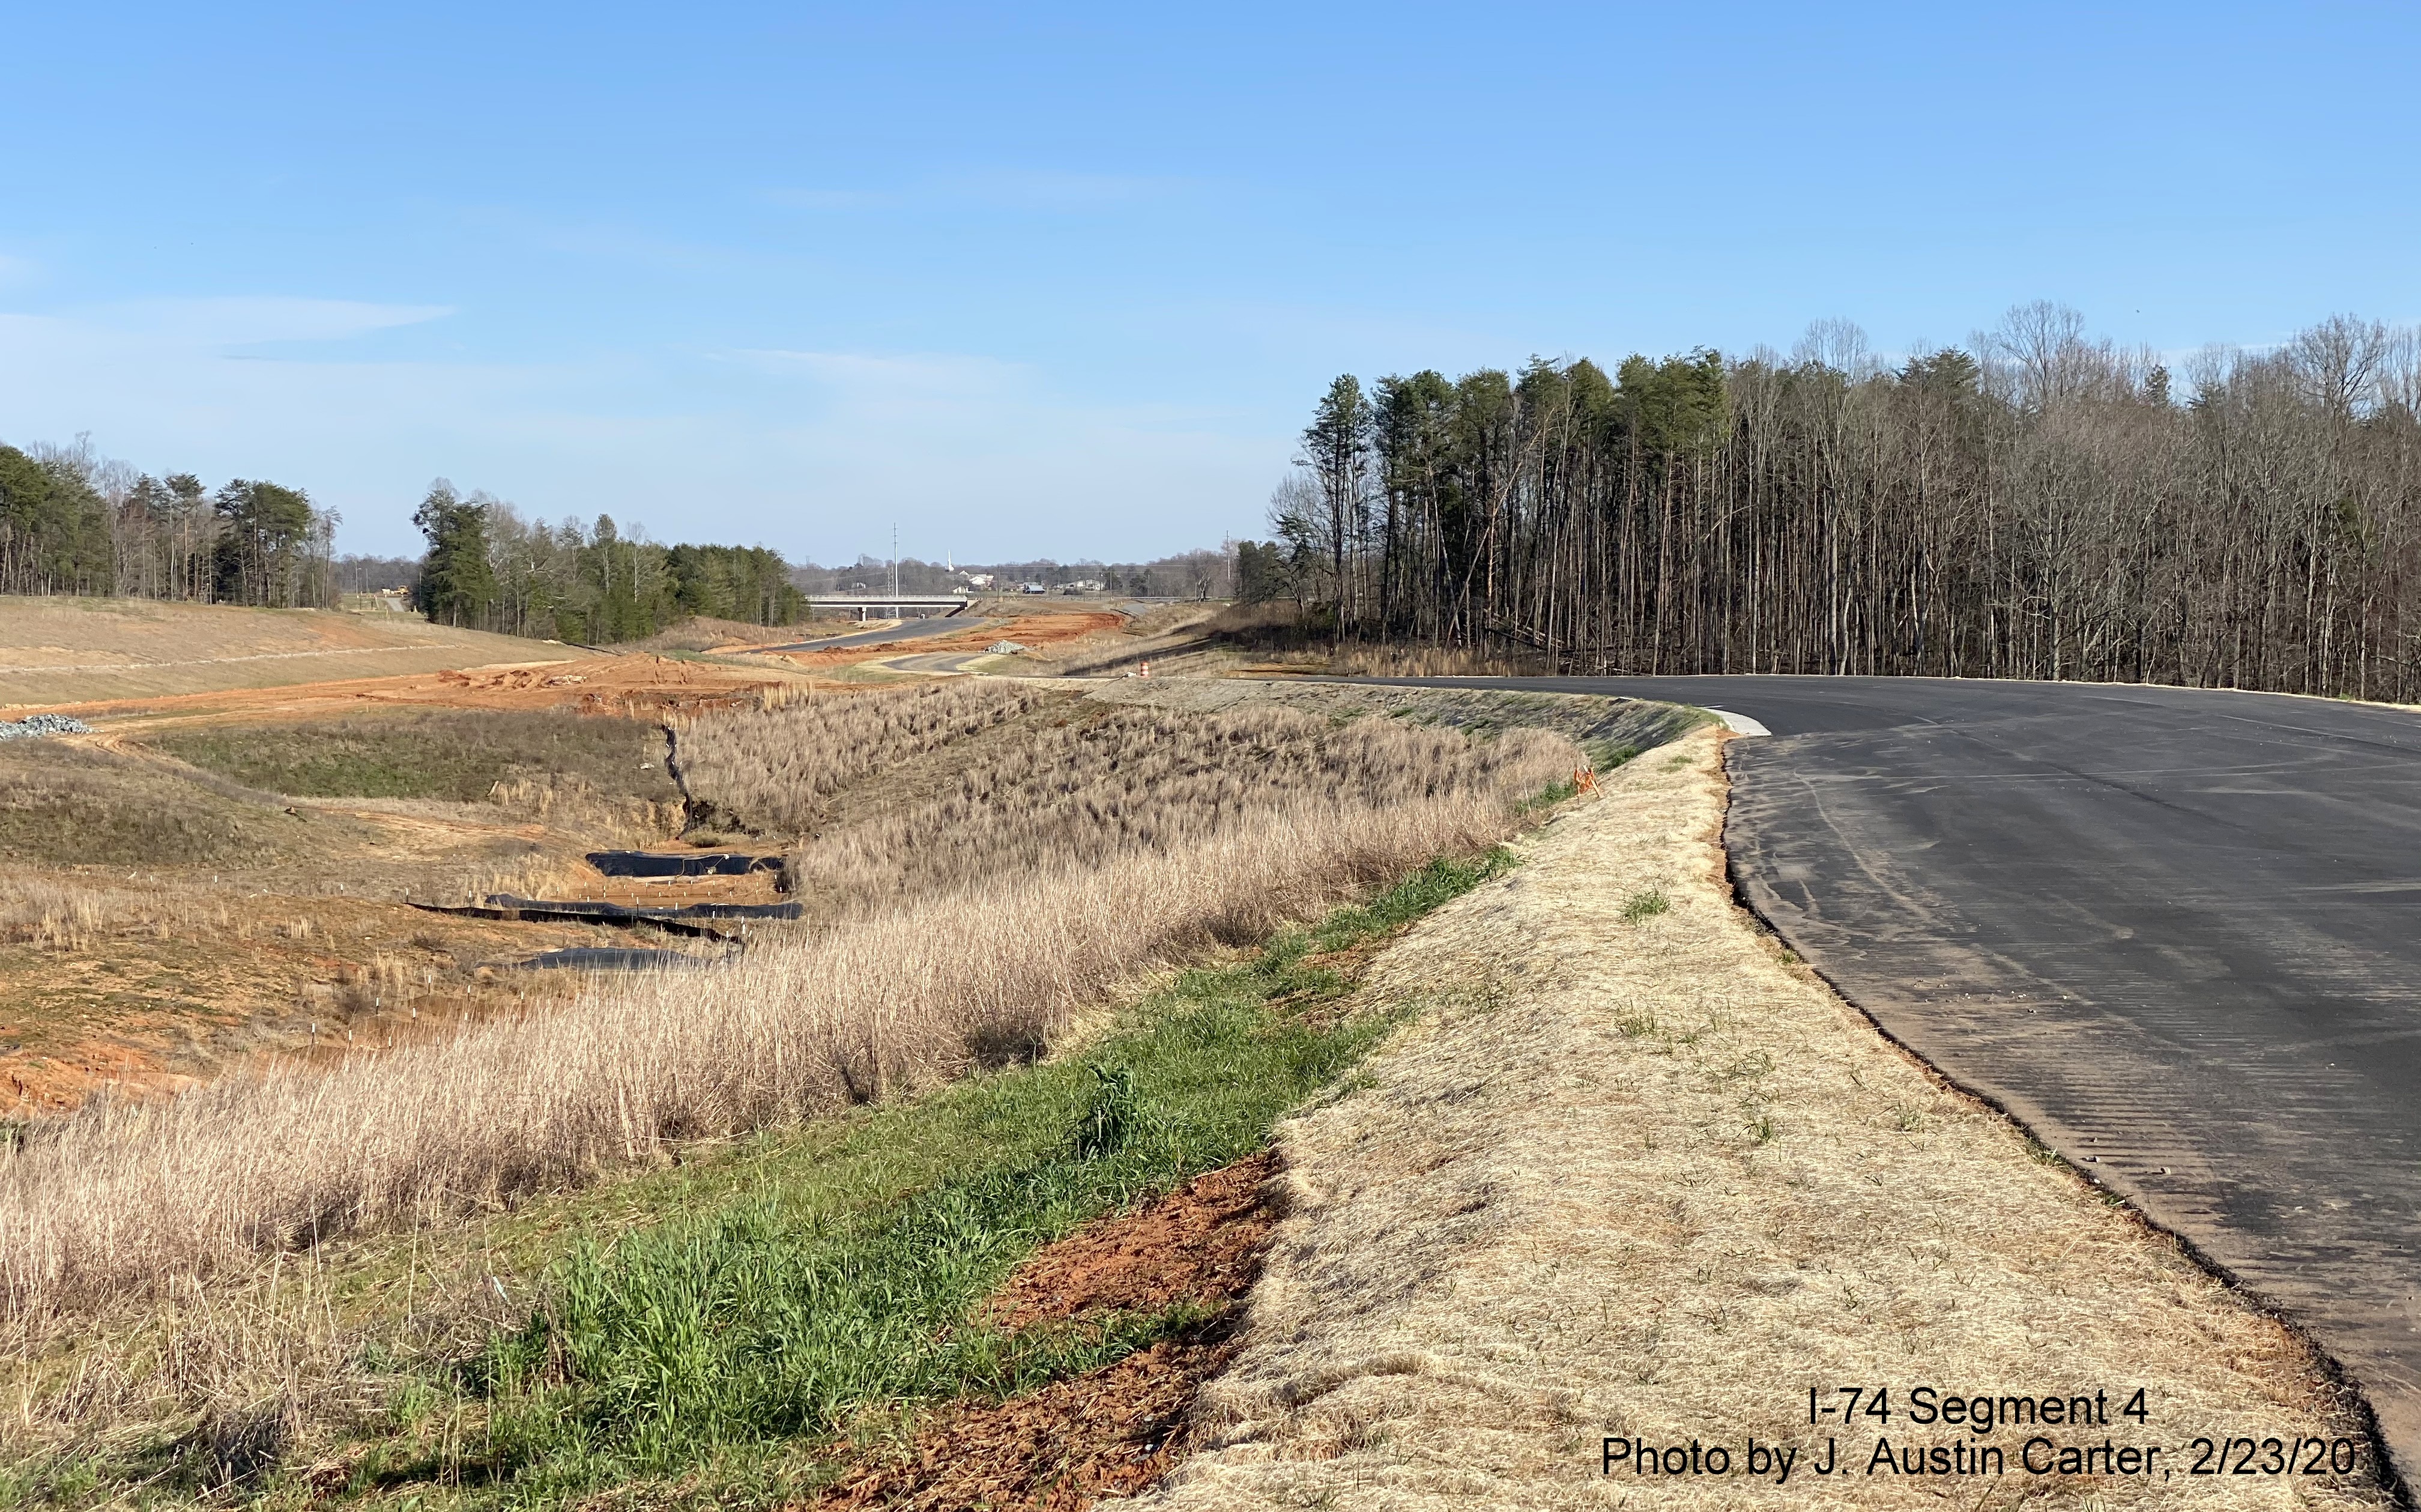 Image of future on-ramp to I-74 East/Winston-Salem Beltway from
        US 311, by J. Austin Carter in Feb. 2020